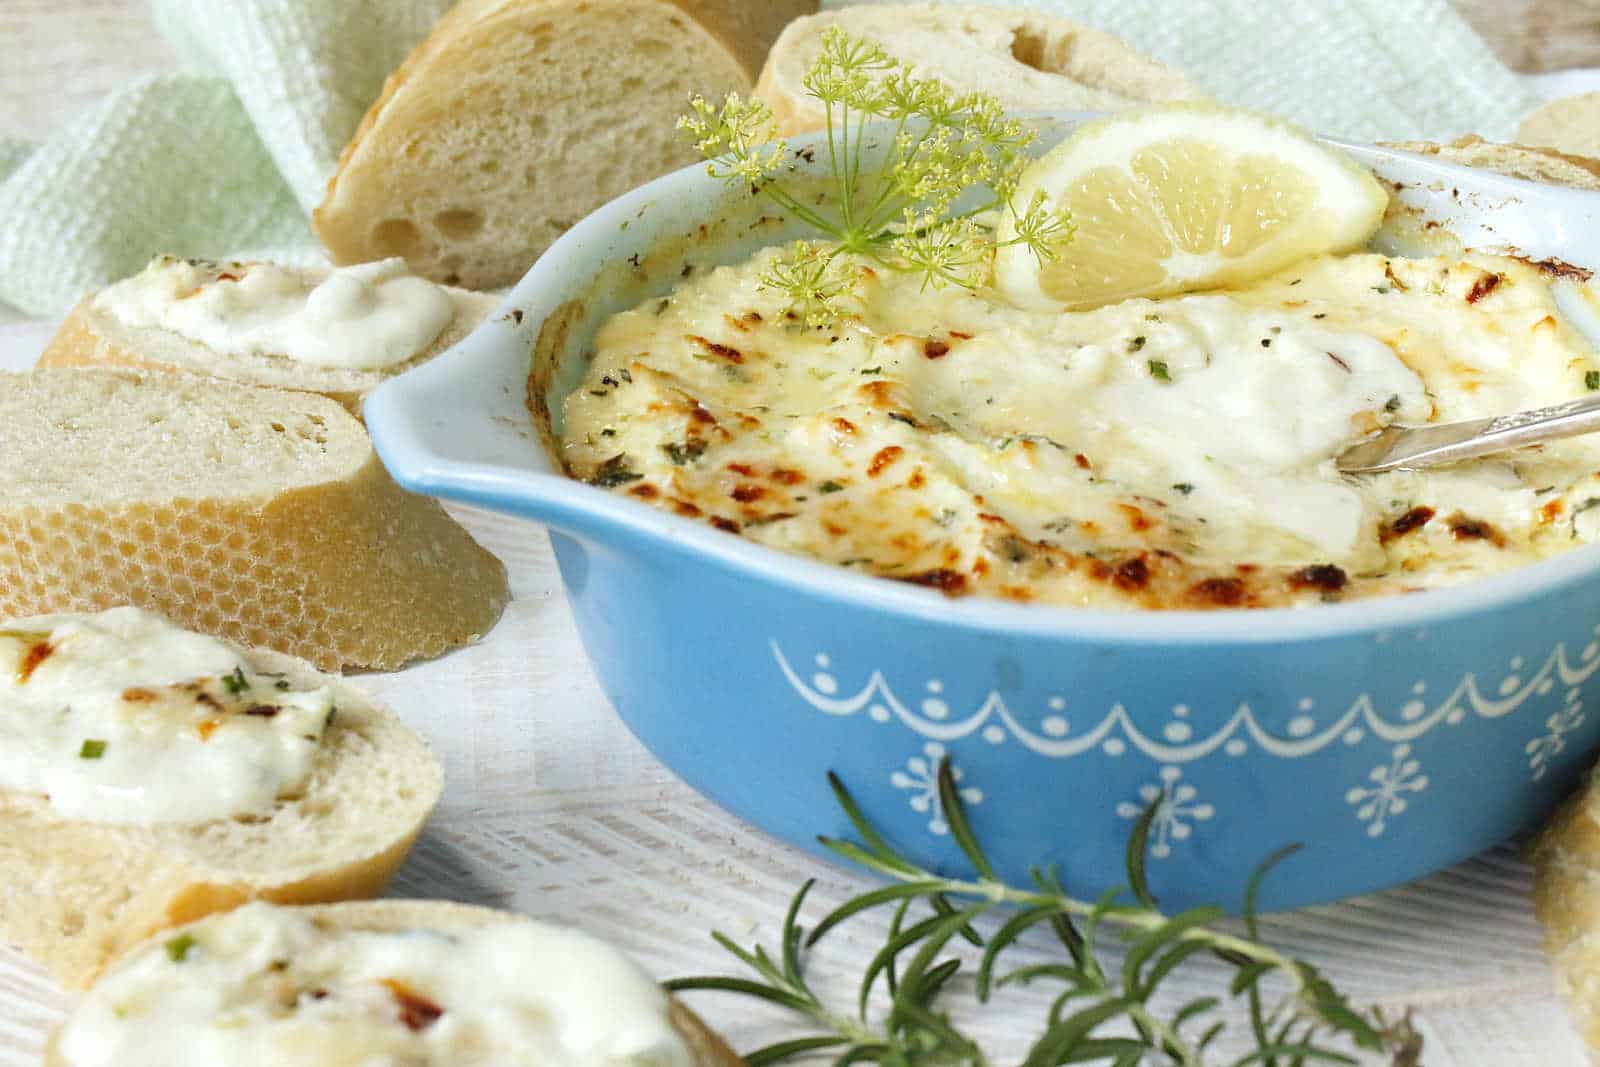 Baked ricotta cheese in a blue casserole dish with sliced bread.